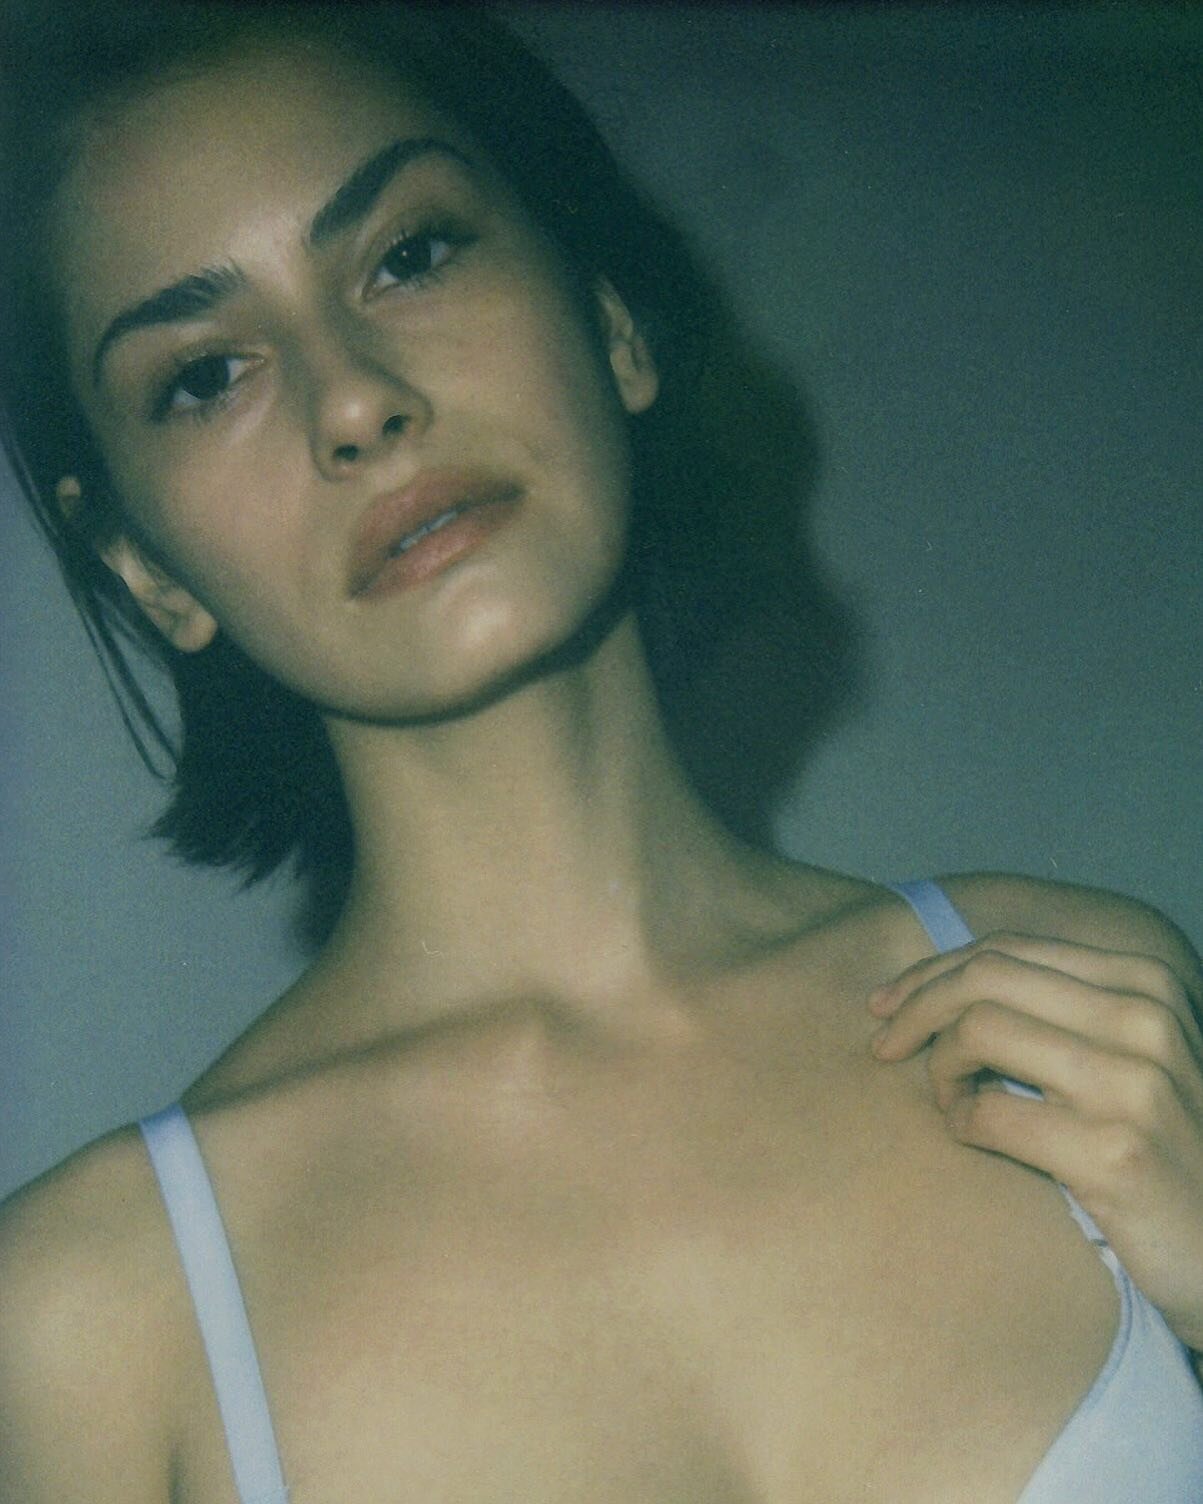 A little beauty polaroid of @hannahkleit for @cuup captured by @david_roemer Makeup by @christinecherbonnier using @reynskin Hair by @yukienammori